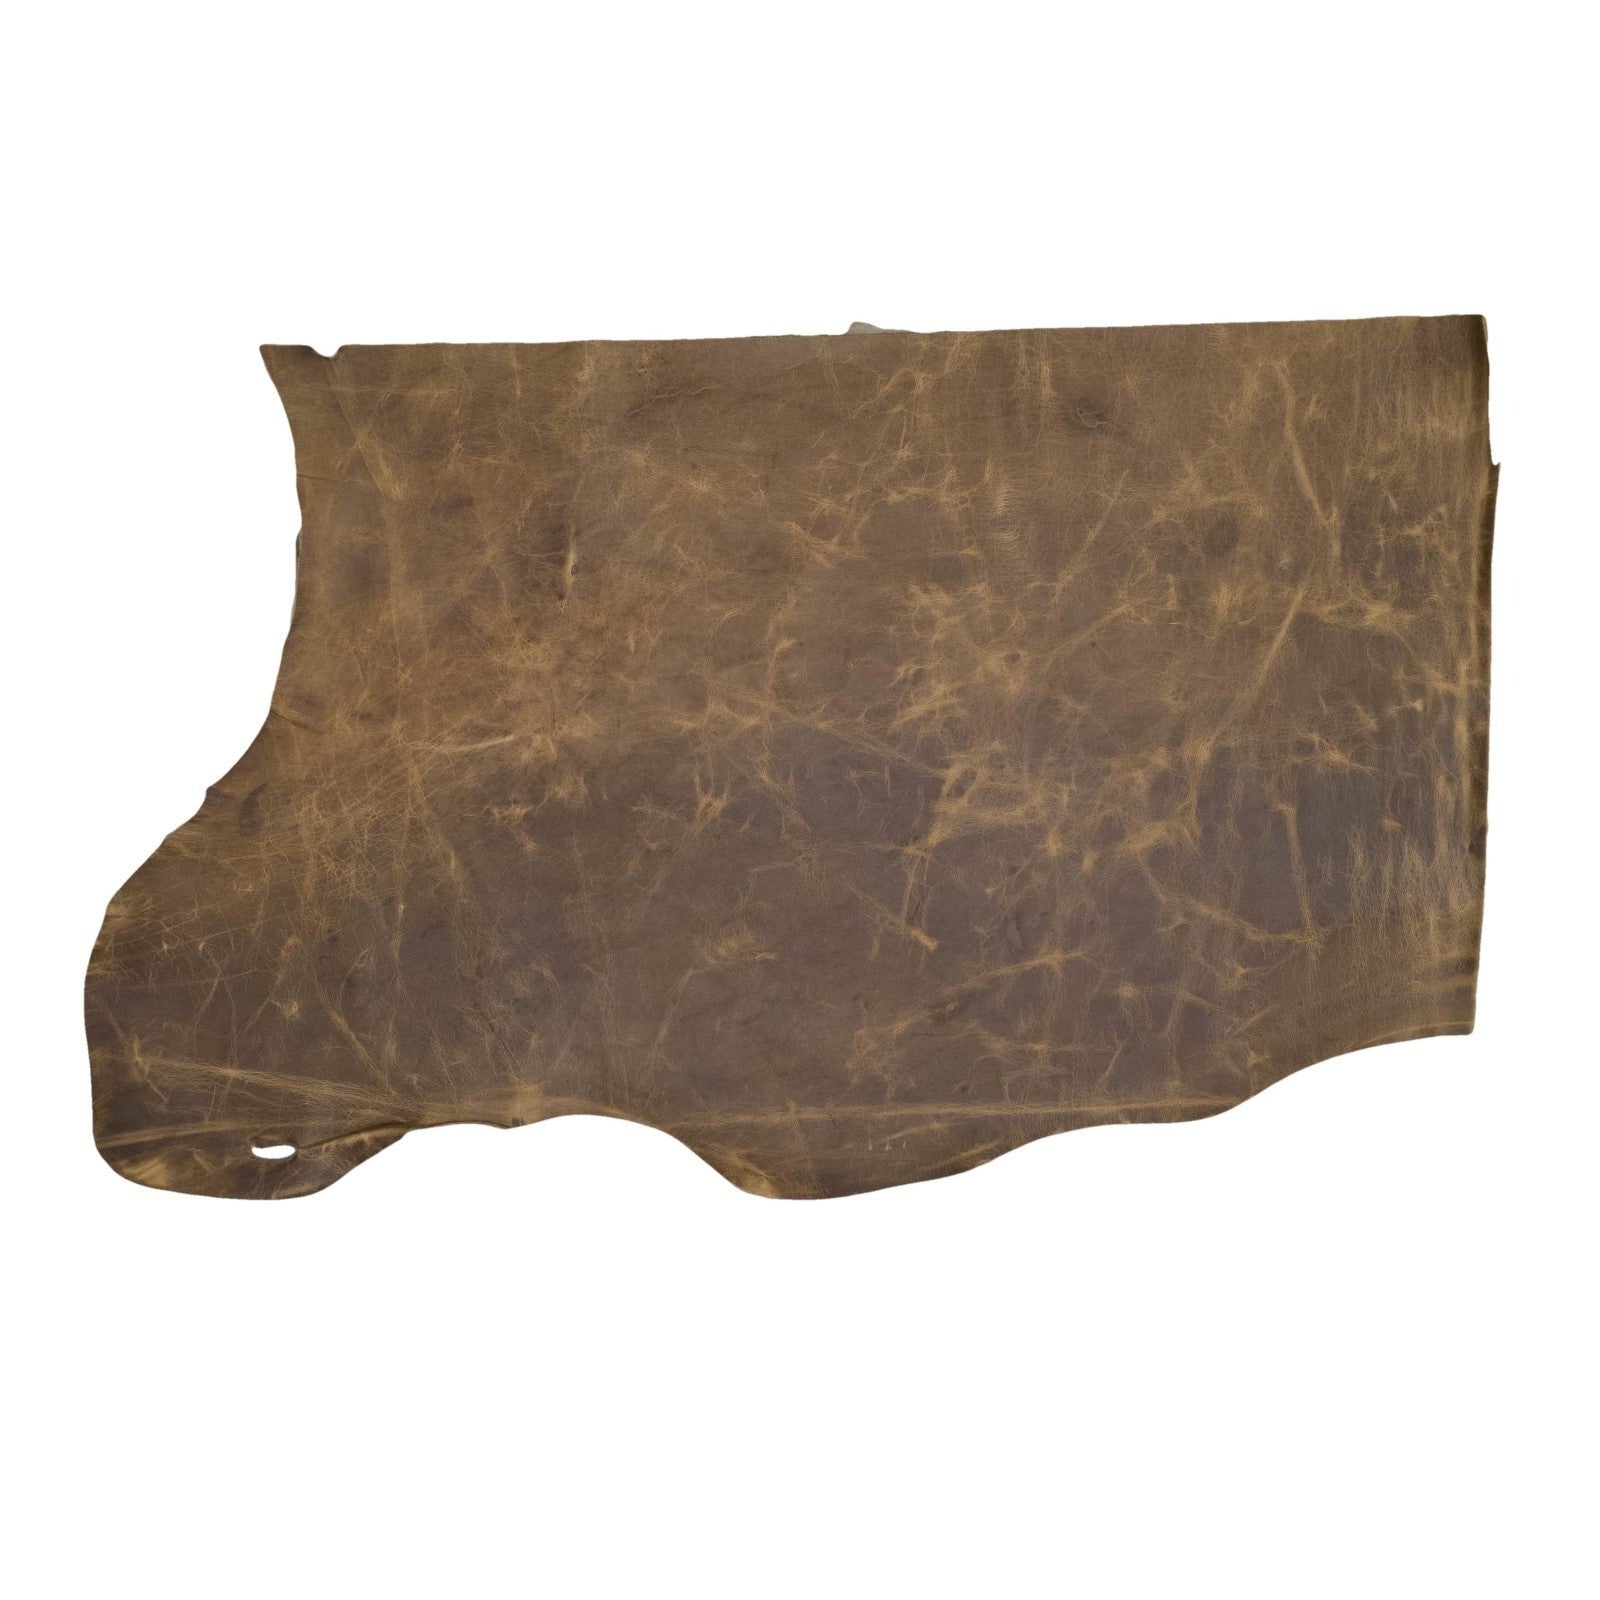 River Bank Brown, 6.5-32 SqFt, 2-3 oz, Pull up Sides & Pieces, Crazy Buffalo, Bottom Piece / 6.5-7.5 | The Leather Guy